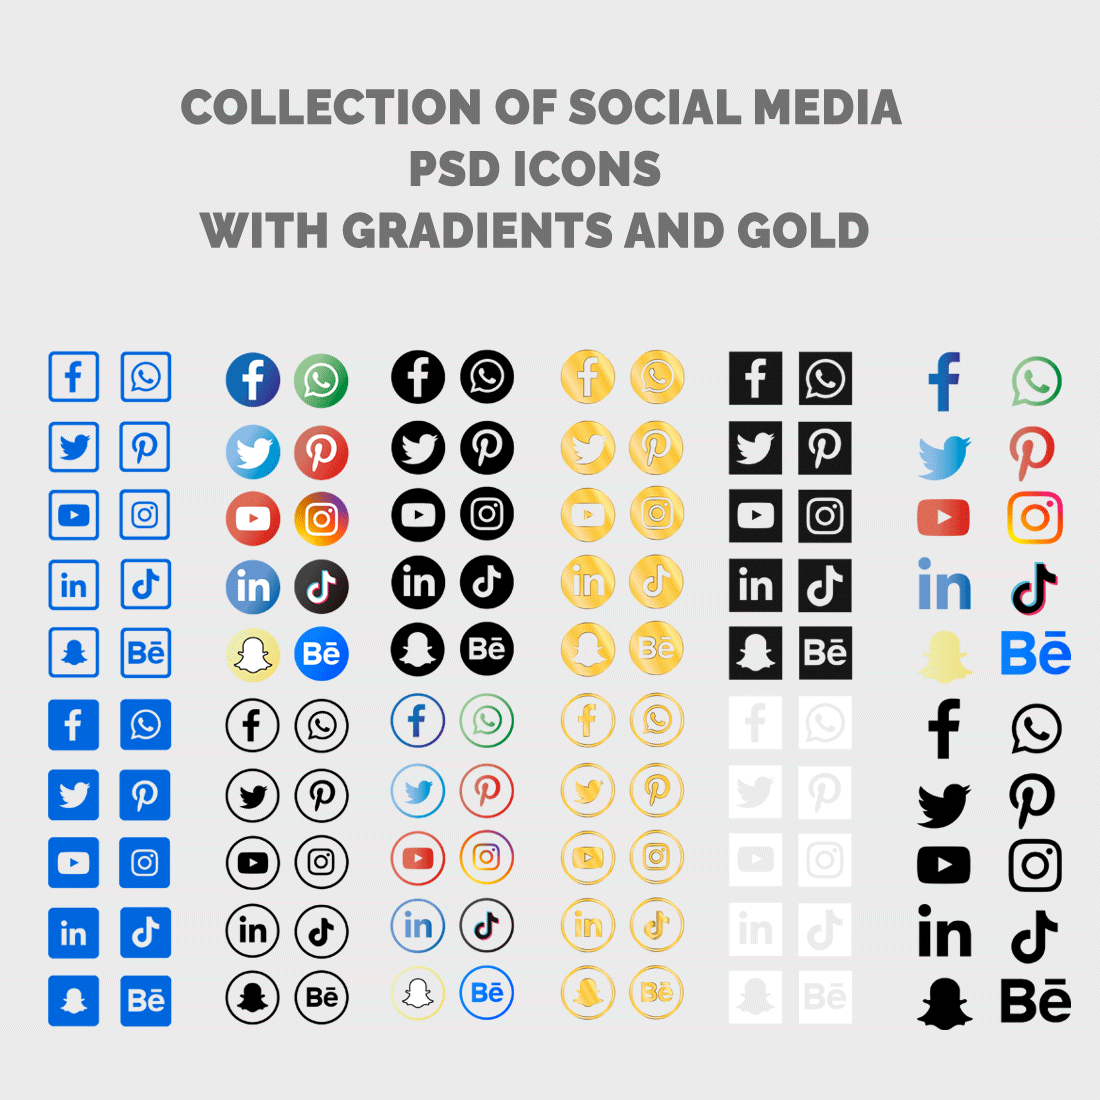 Collection of social media psd icons with gradients and gold preview image.